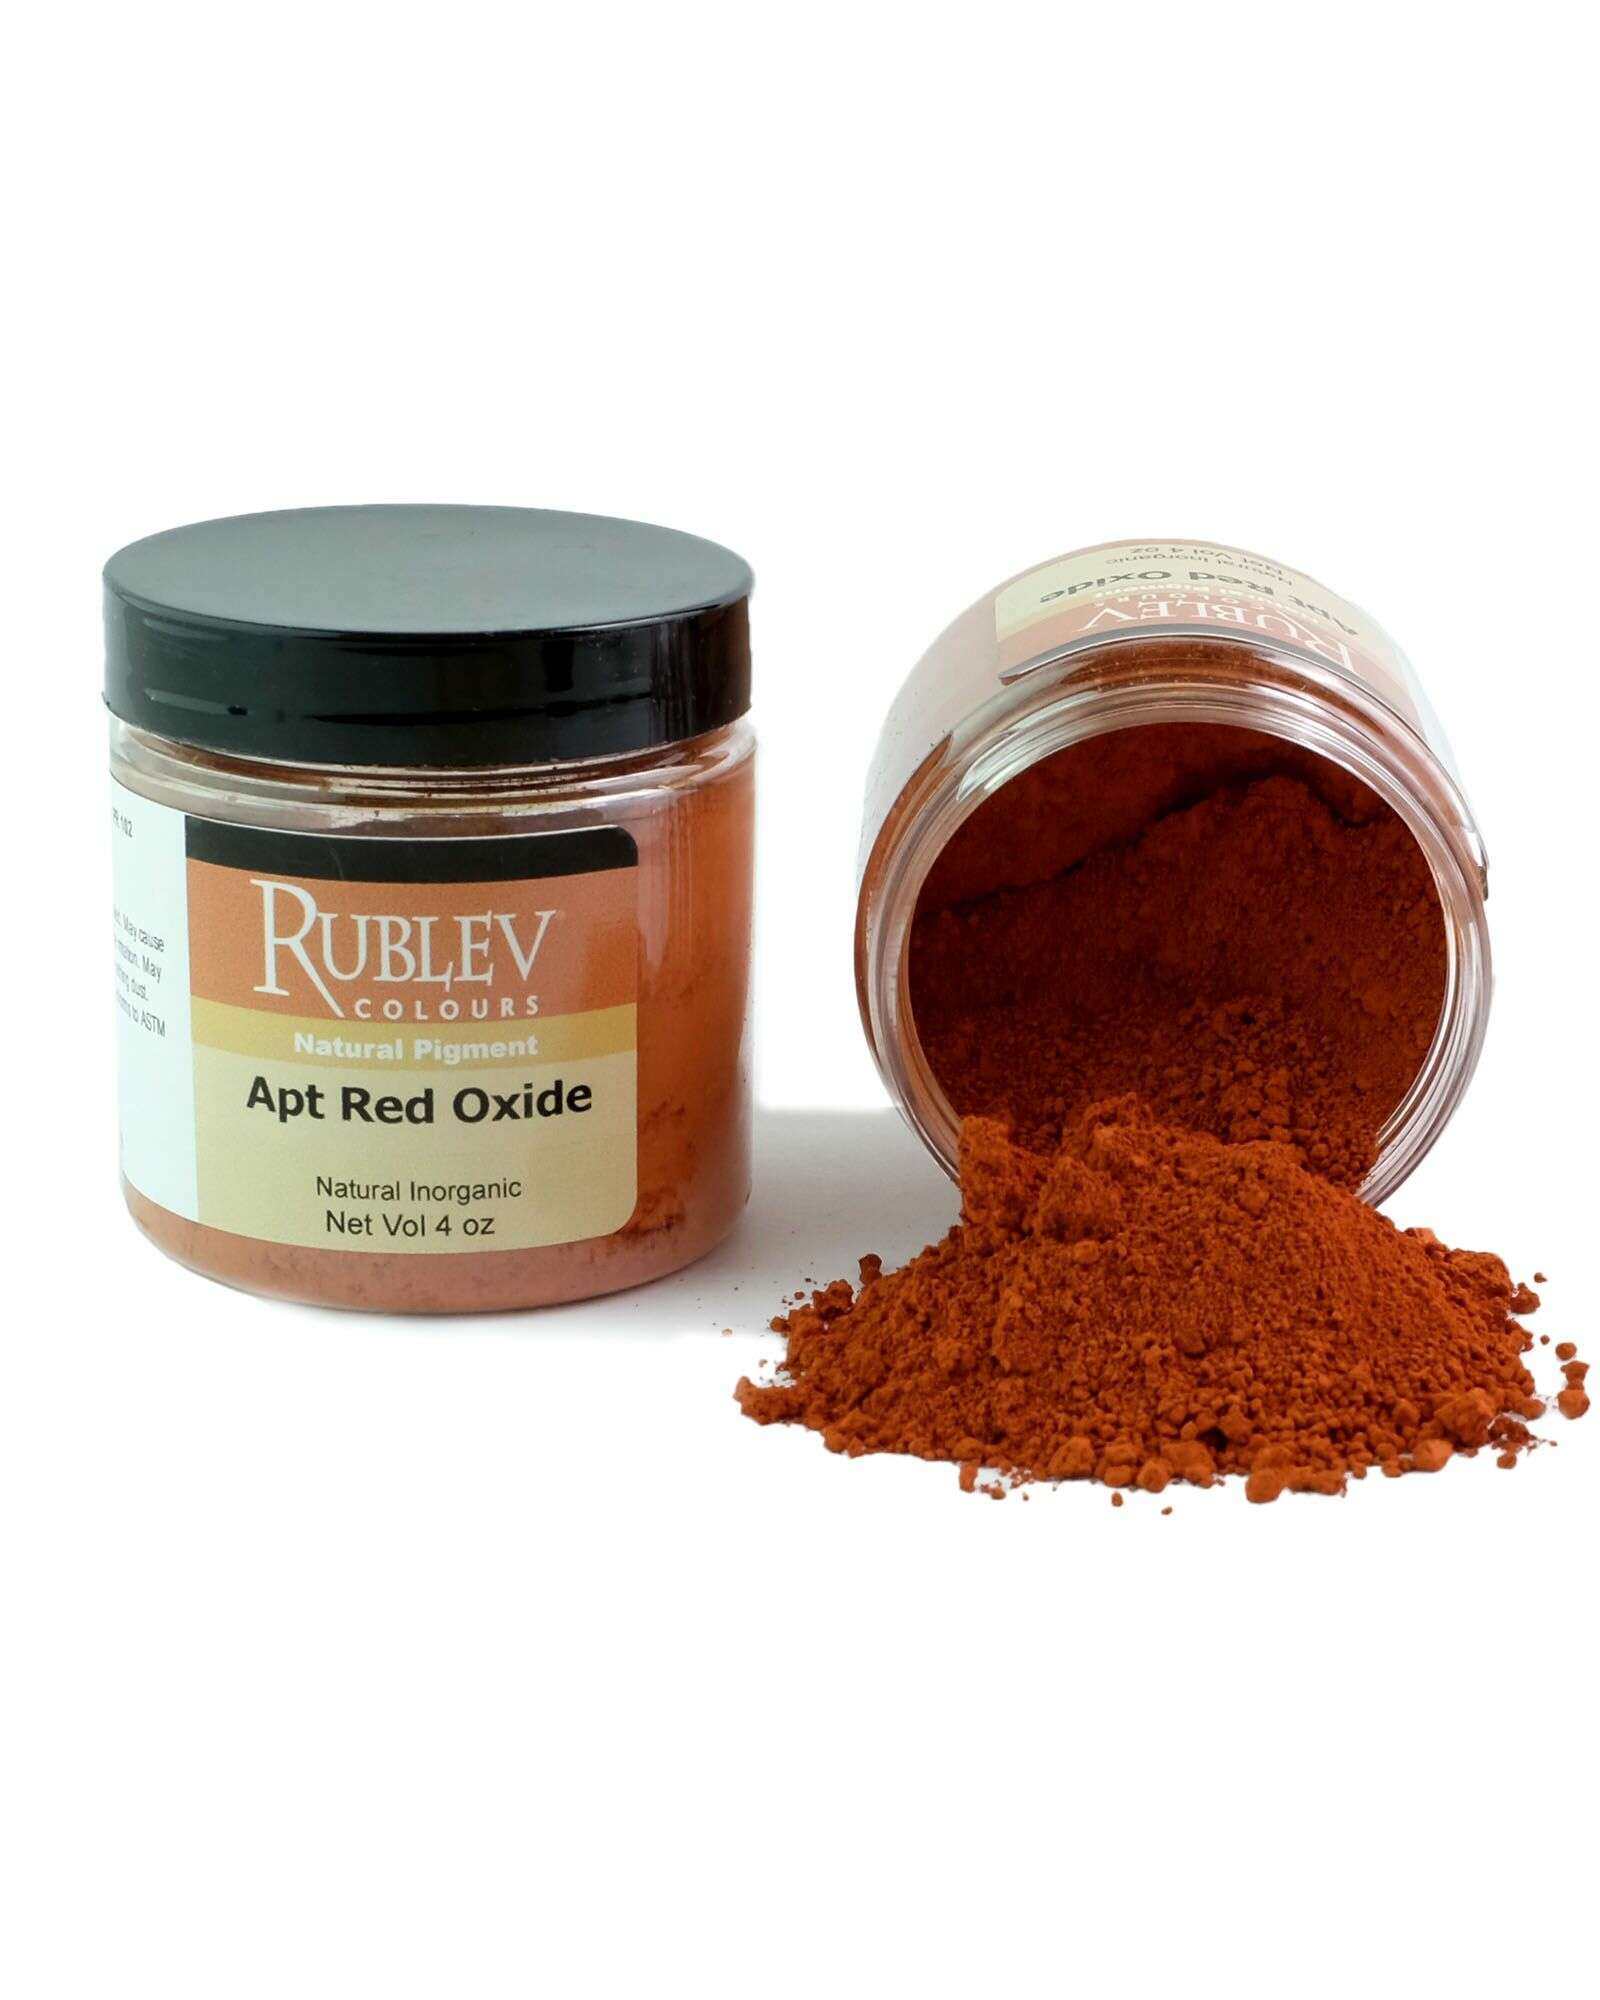 Iron Oxide Red Pigment Red 101 Red Powder for Plastic - China Iron Oxide  Pigment, Iron Oxide